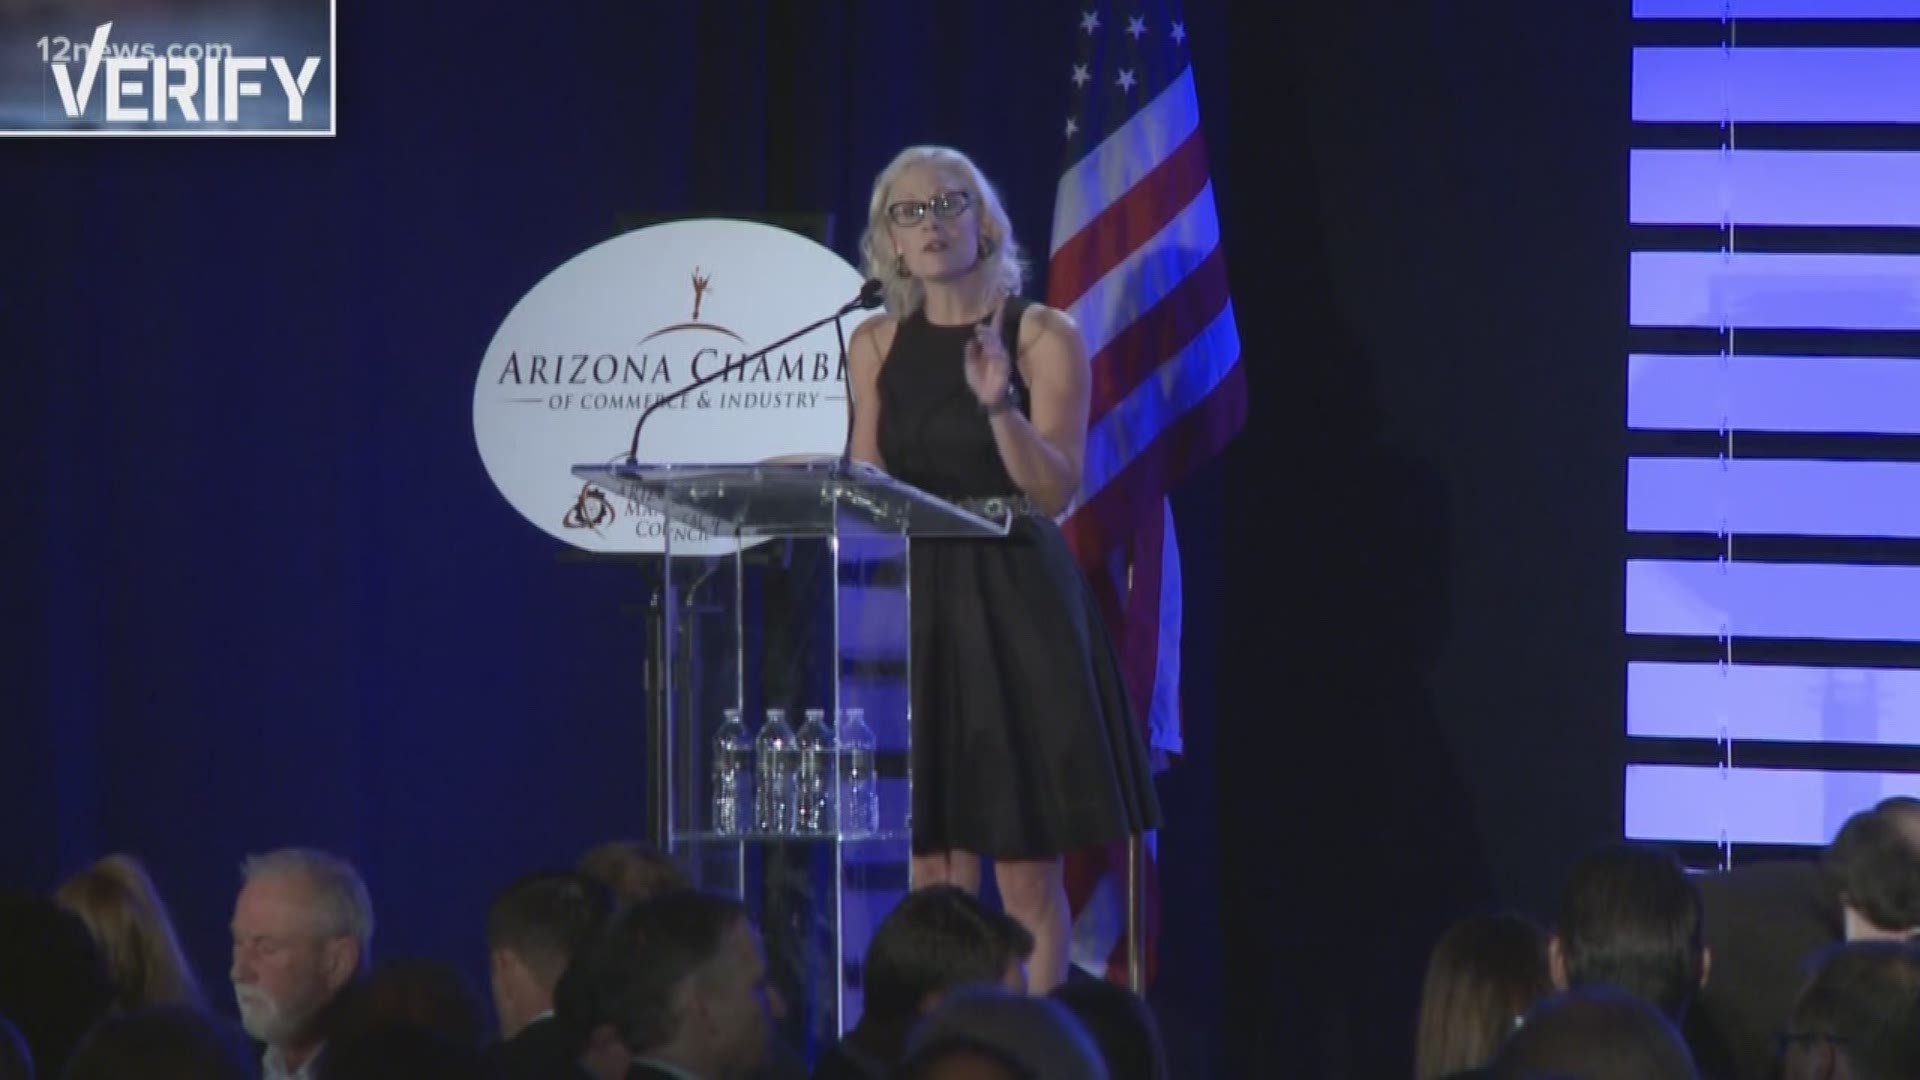 Senators Sinema and McSally are both shutting down questions about the shutdown and President Trump's border wall. We verify the votes they've cast regarding both.